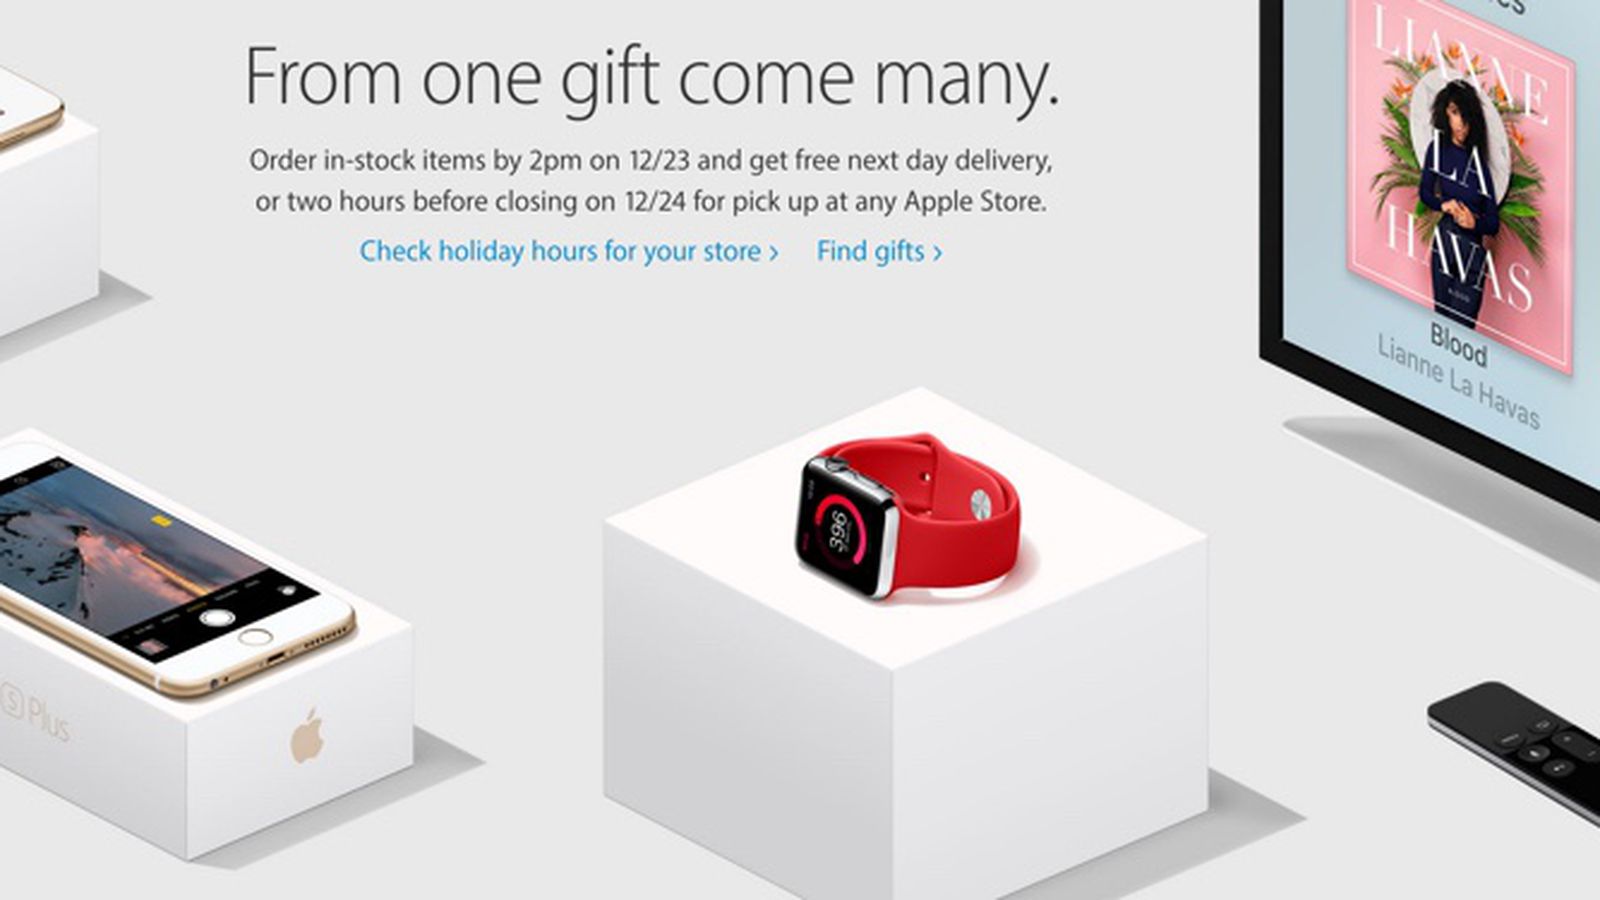 Apple Offering Free Next Day Delivery On December 23 - MacRumors